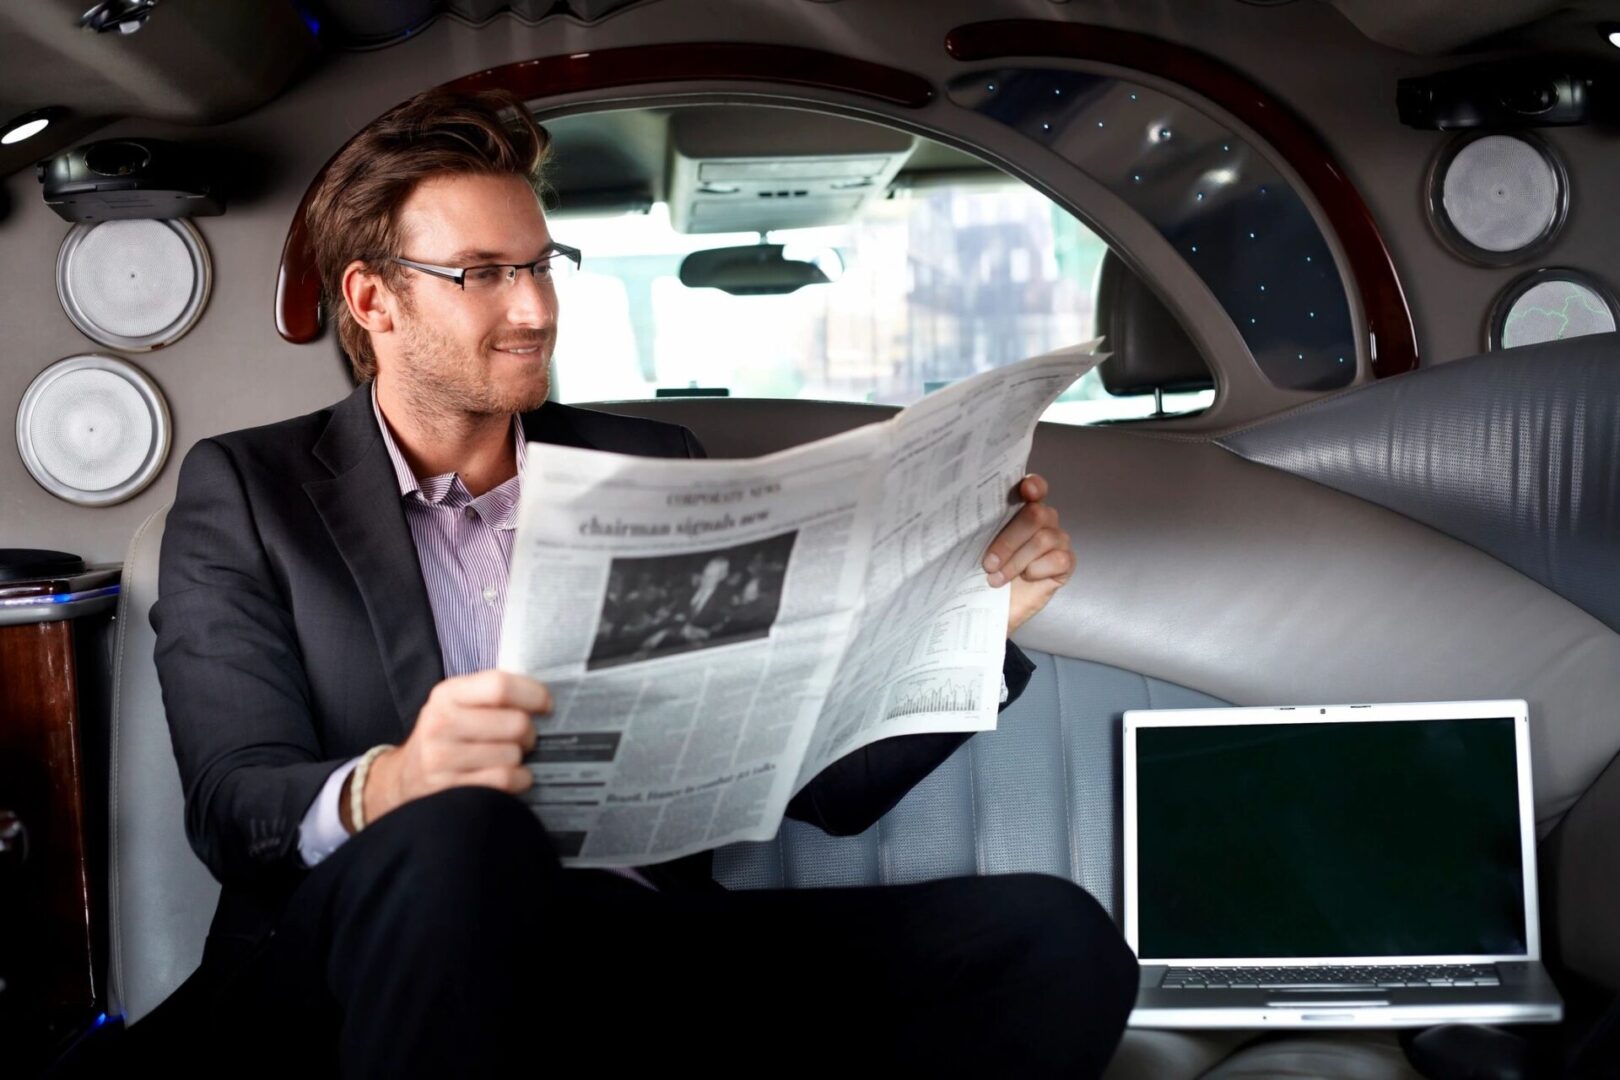 A man sitting in the back of a car reading a newspaper.